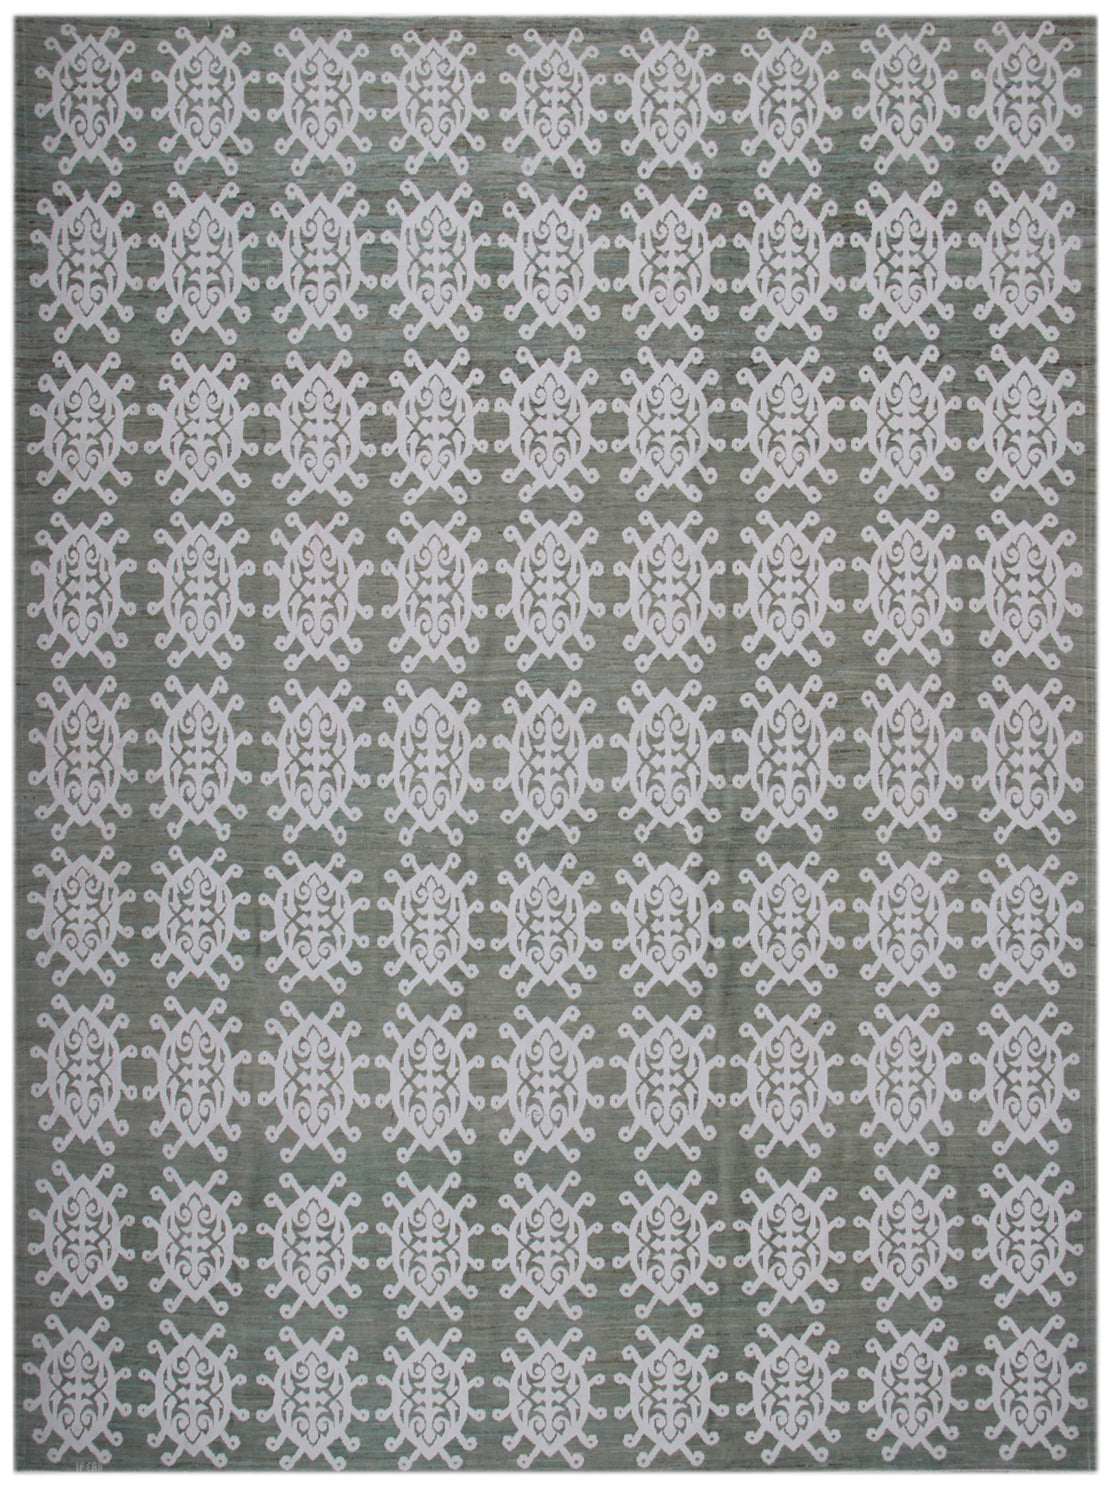 10'x8' Green Turtle Design Hand-knotted Ariana Area Rug